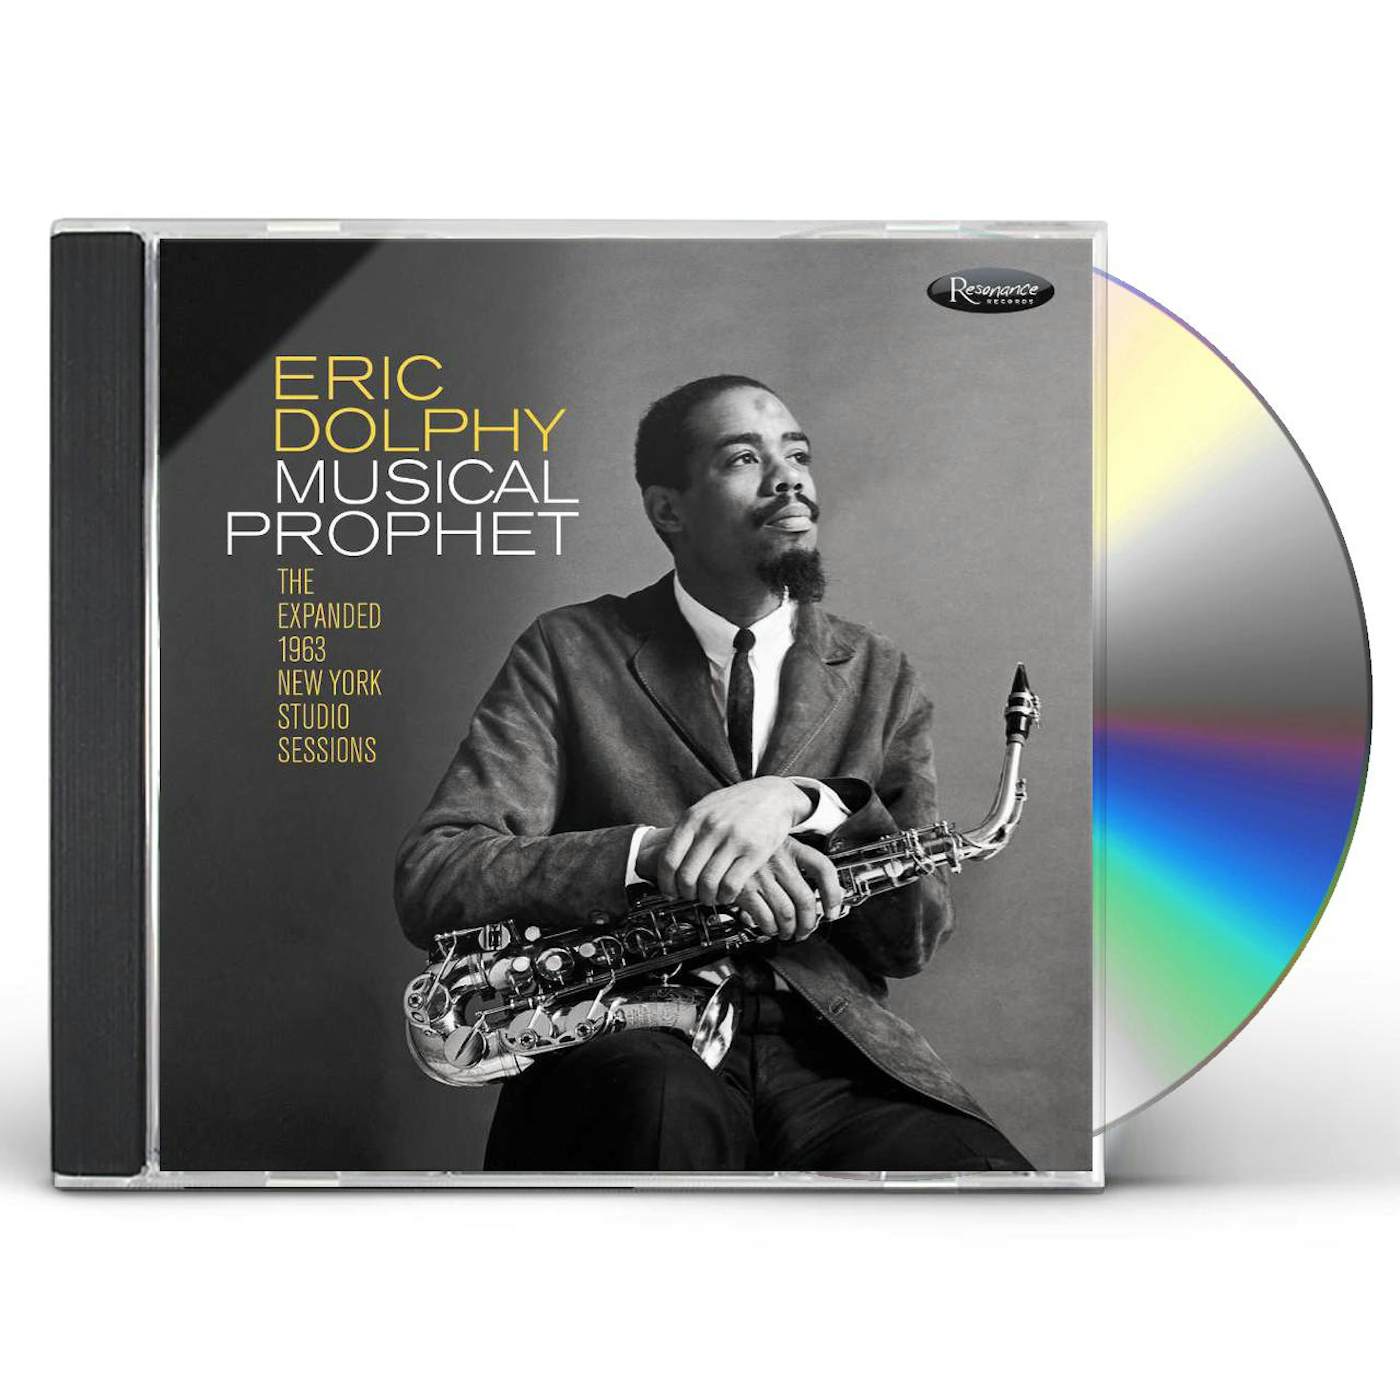 Eric Dolphy MUSICAL PROPHET: THE EXPANDED 1963 NEW YORK STUDIO CD